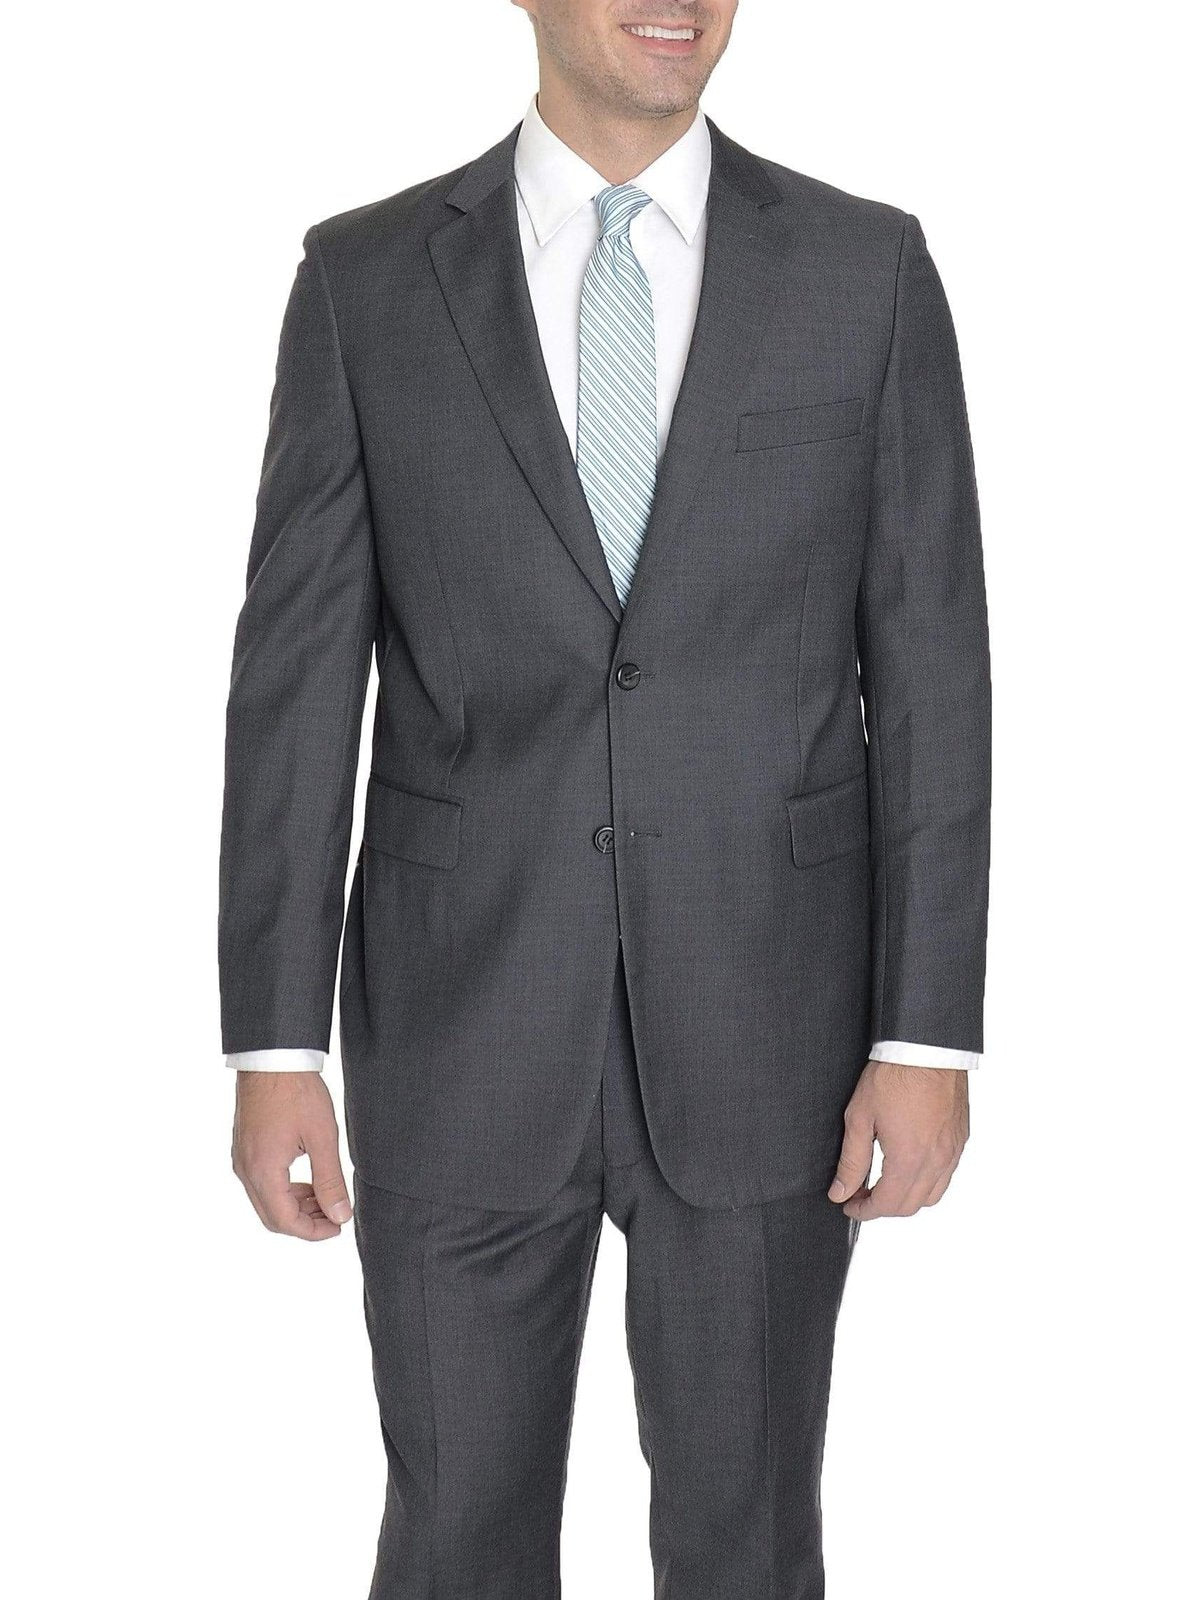 Raphael TWO PIECE SUITS 34S Raphael Modern Fit Solid Gray Two Button Wool Suit